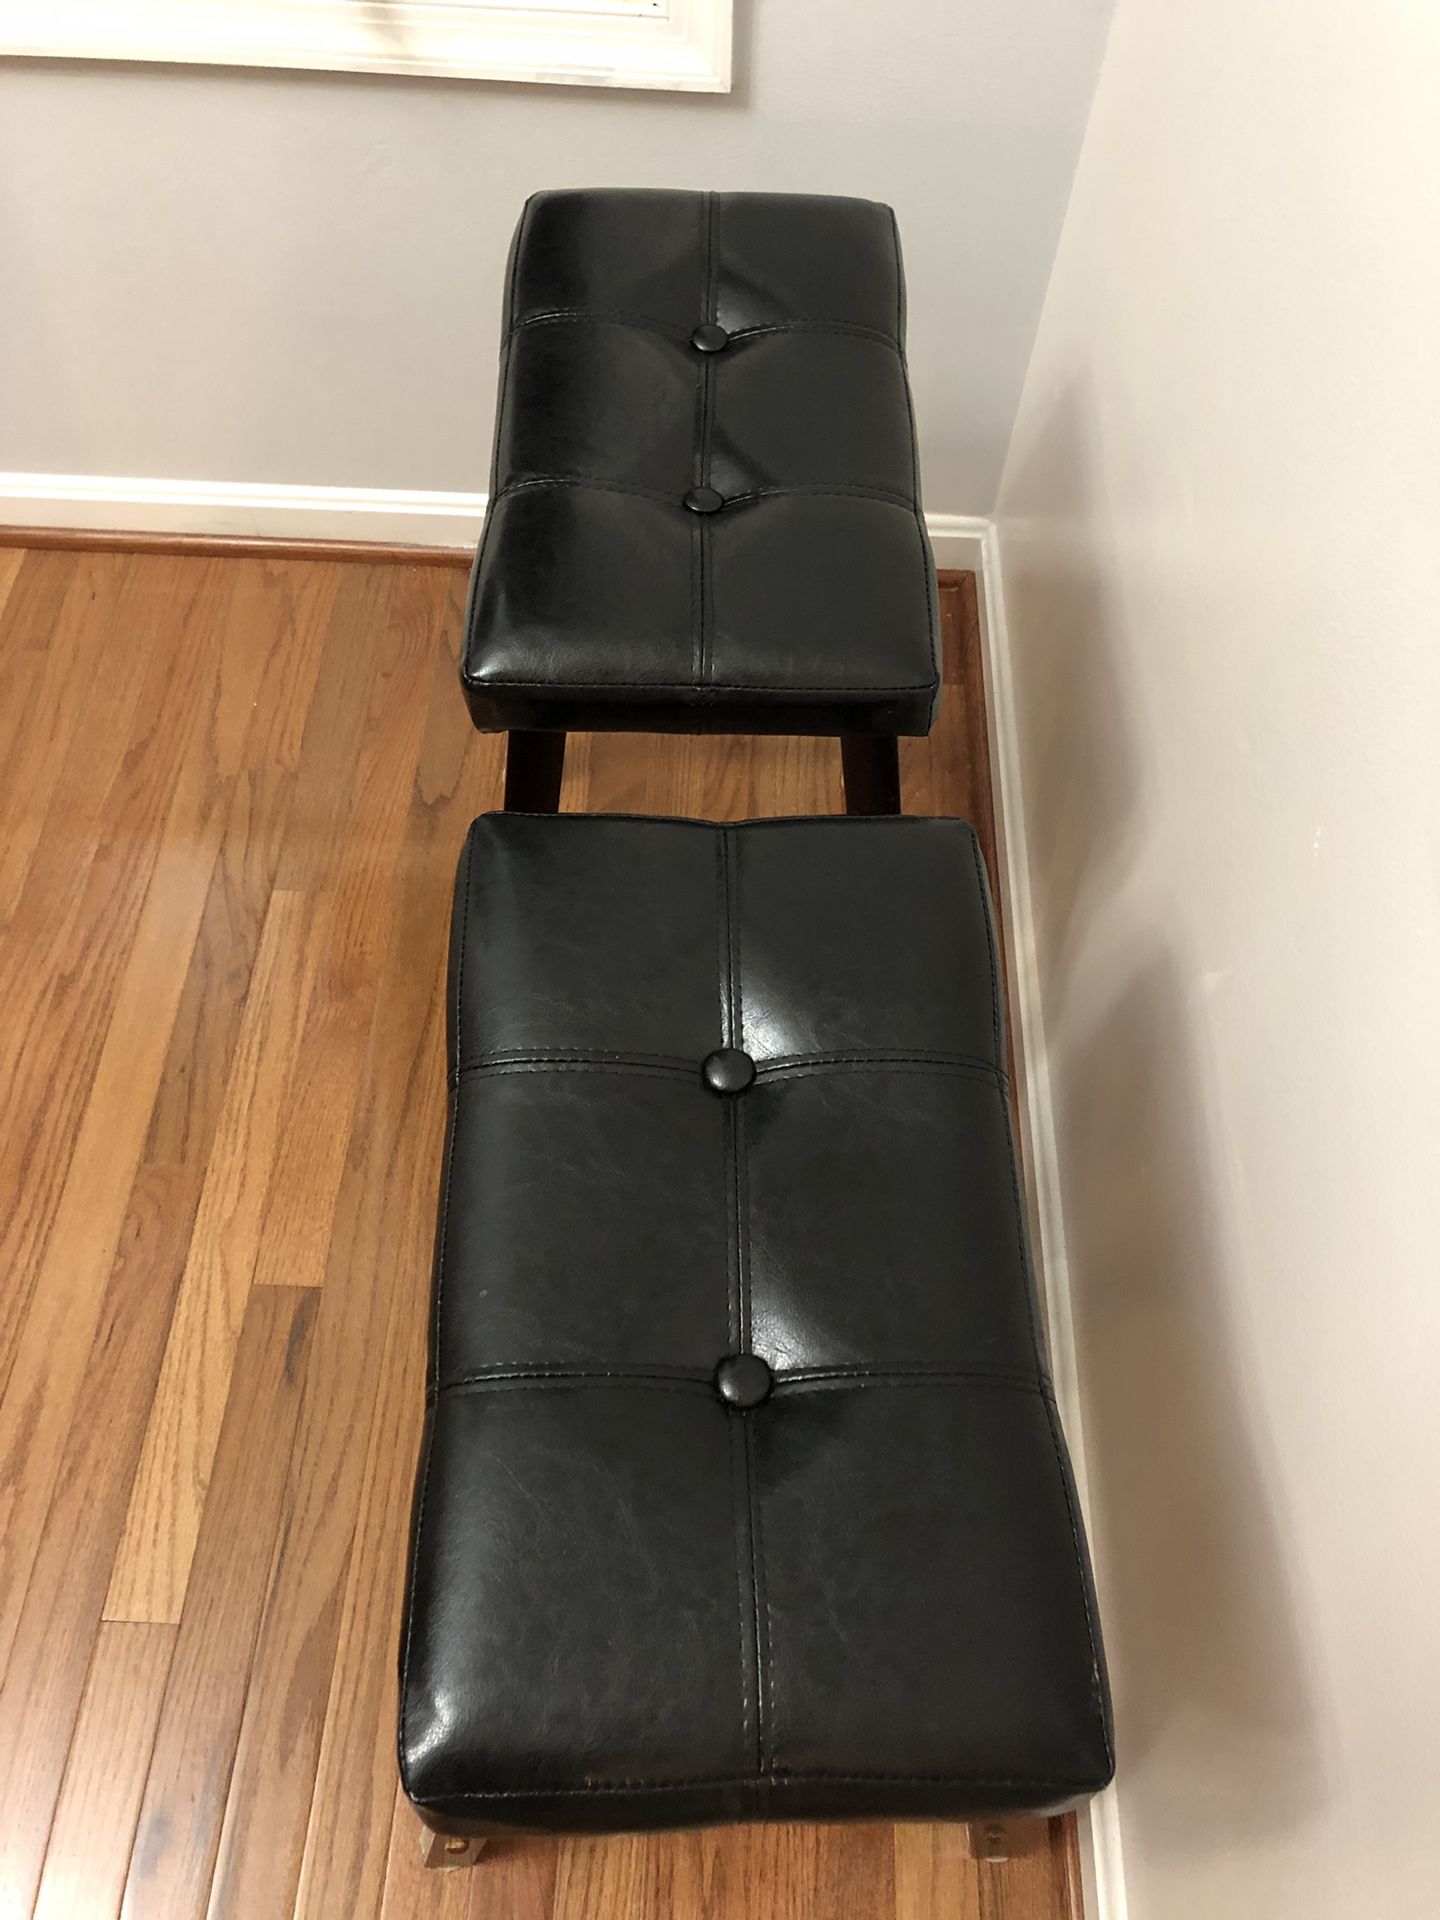 Leather bar stool in excellent condition